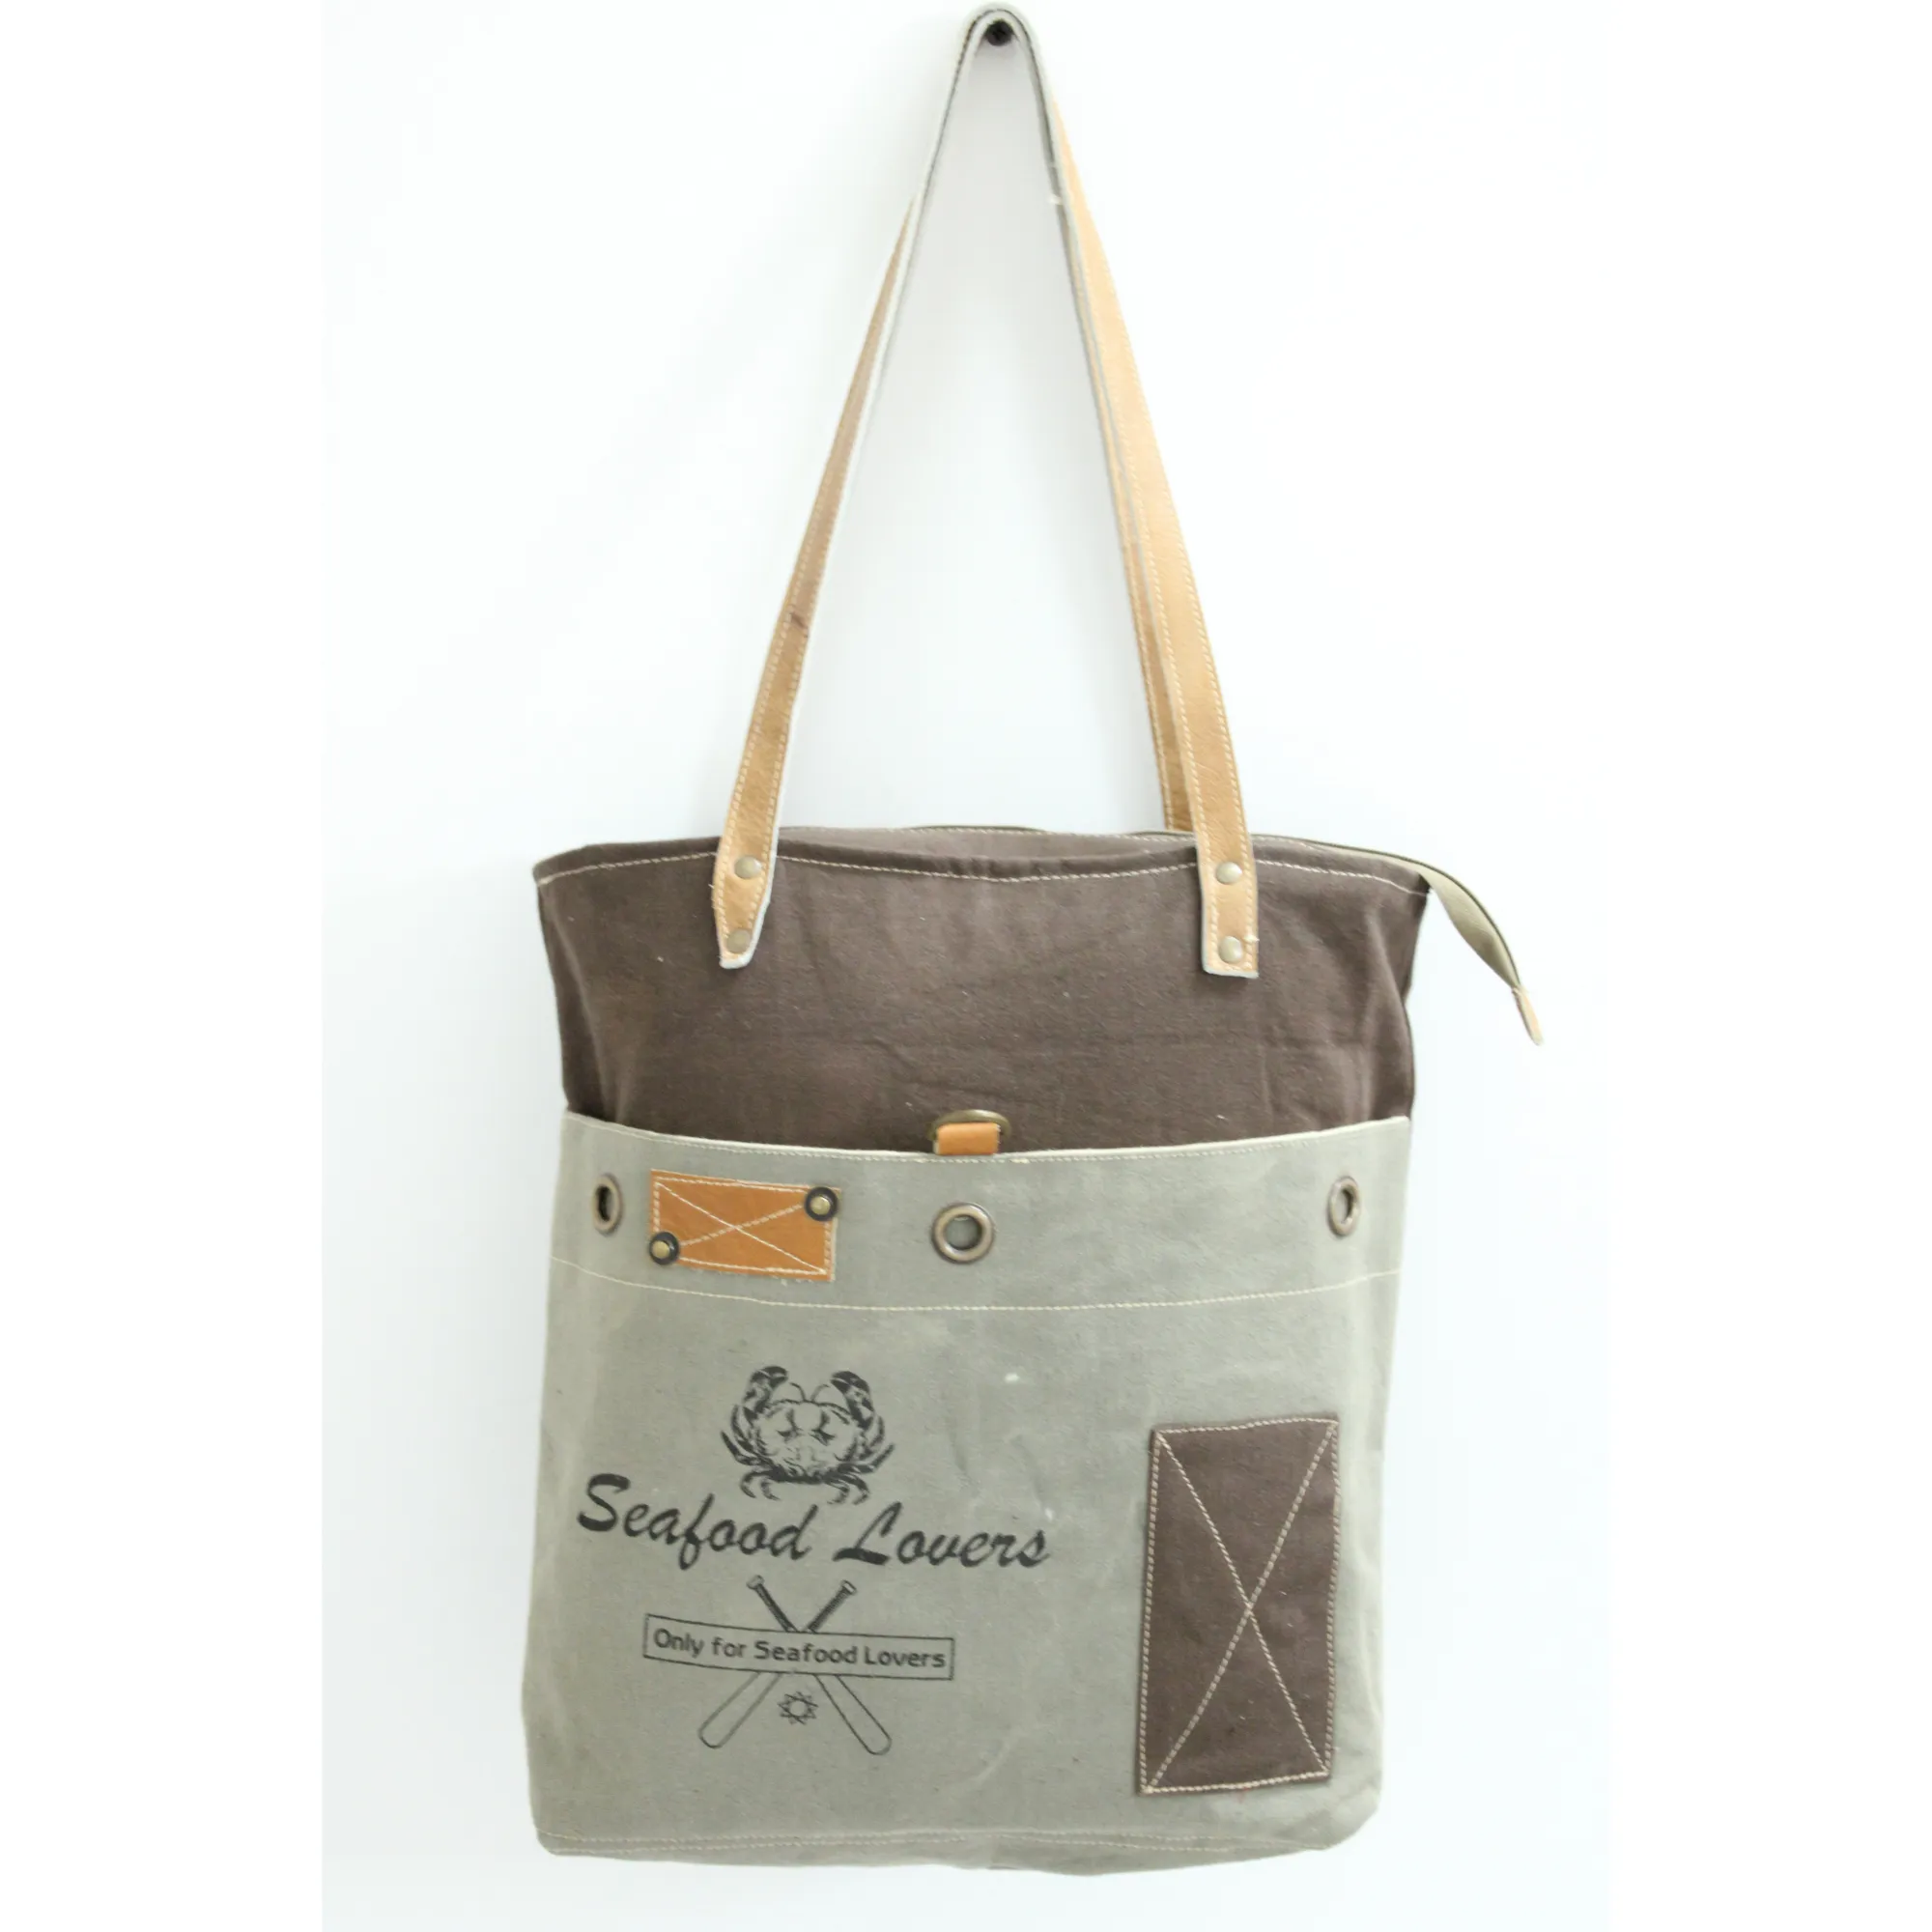 Vintage Cotton Canvas with Genuine Leather Strap's Latest Pattern Printed Design with High Quality Zipped Closer Tote Handbag